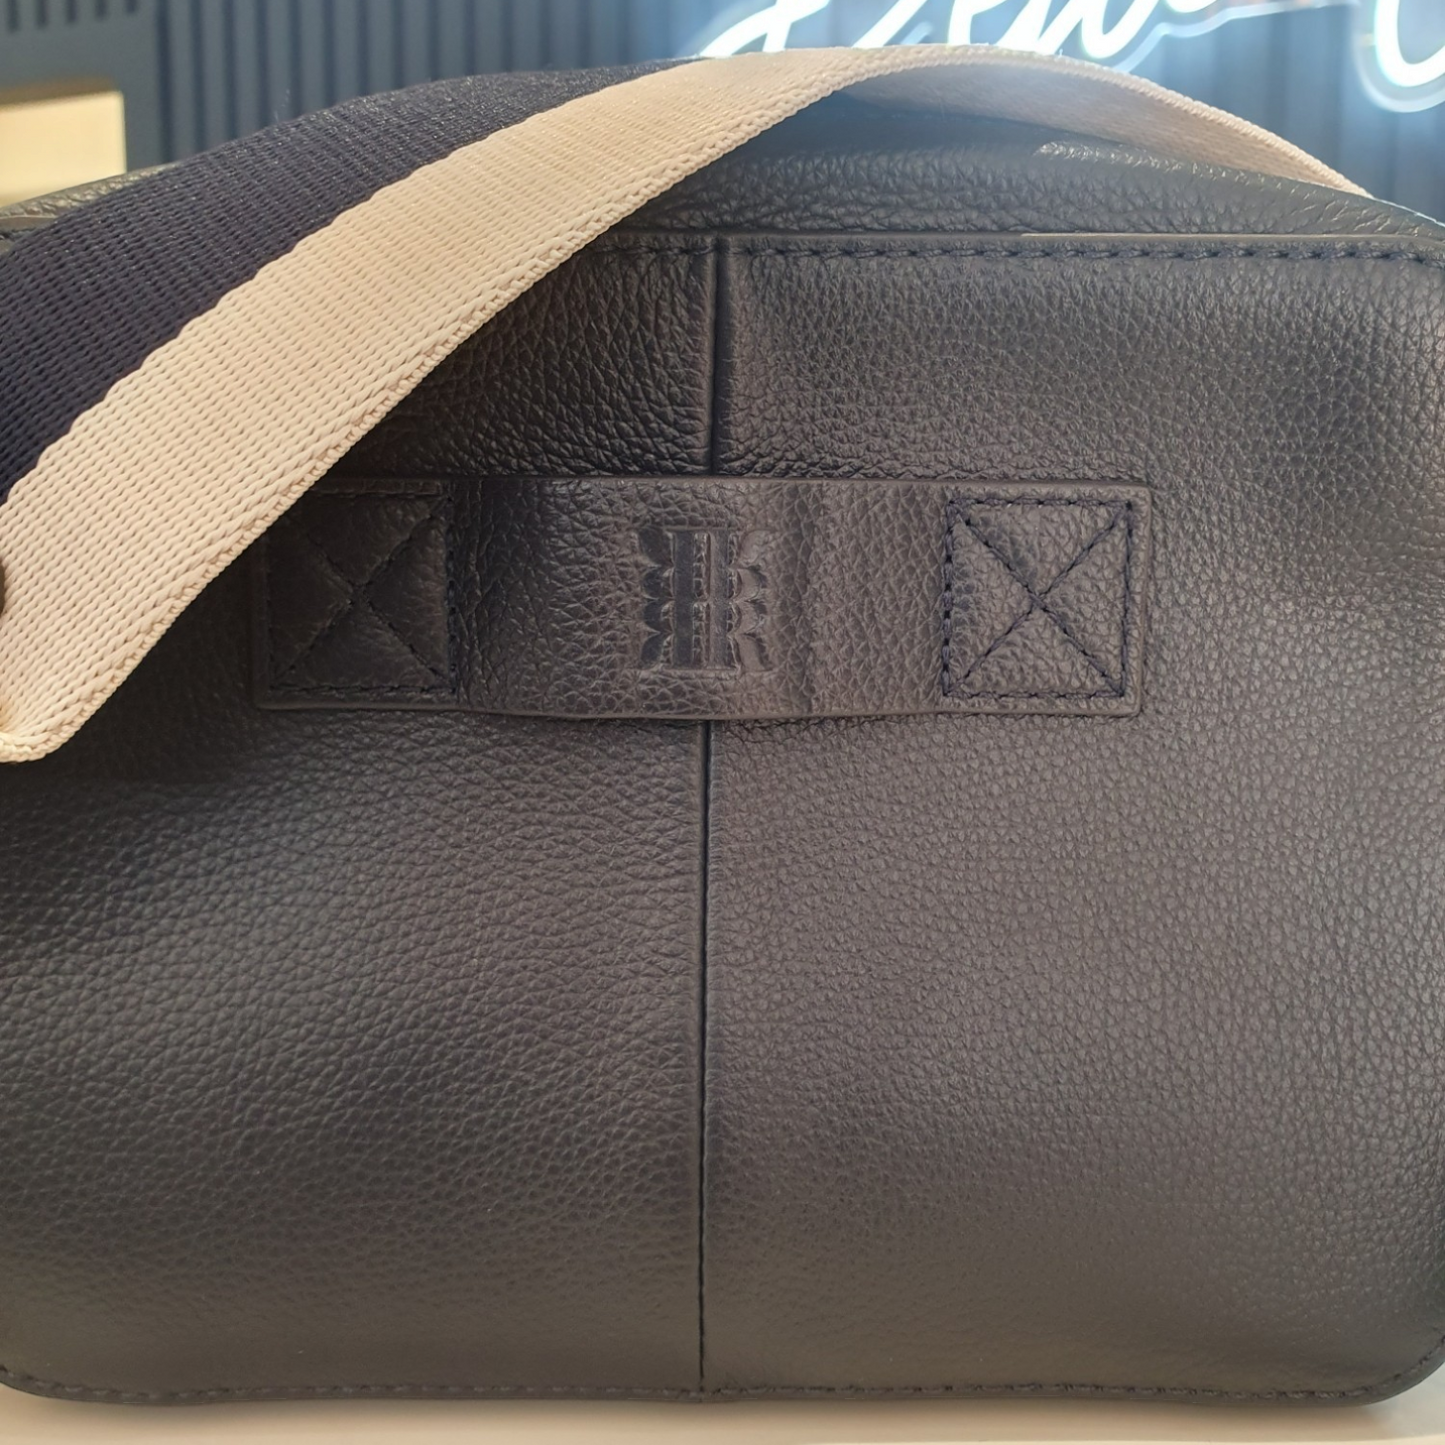 Reiss Navy leather camera bag, two straps, brand new